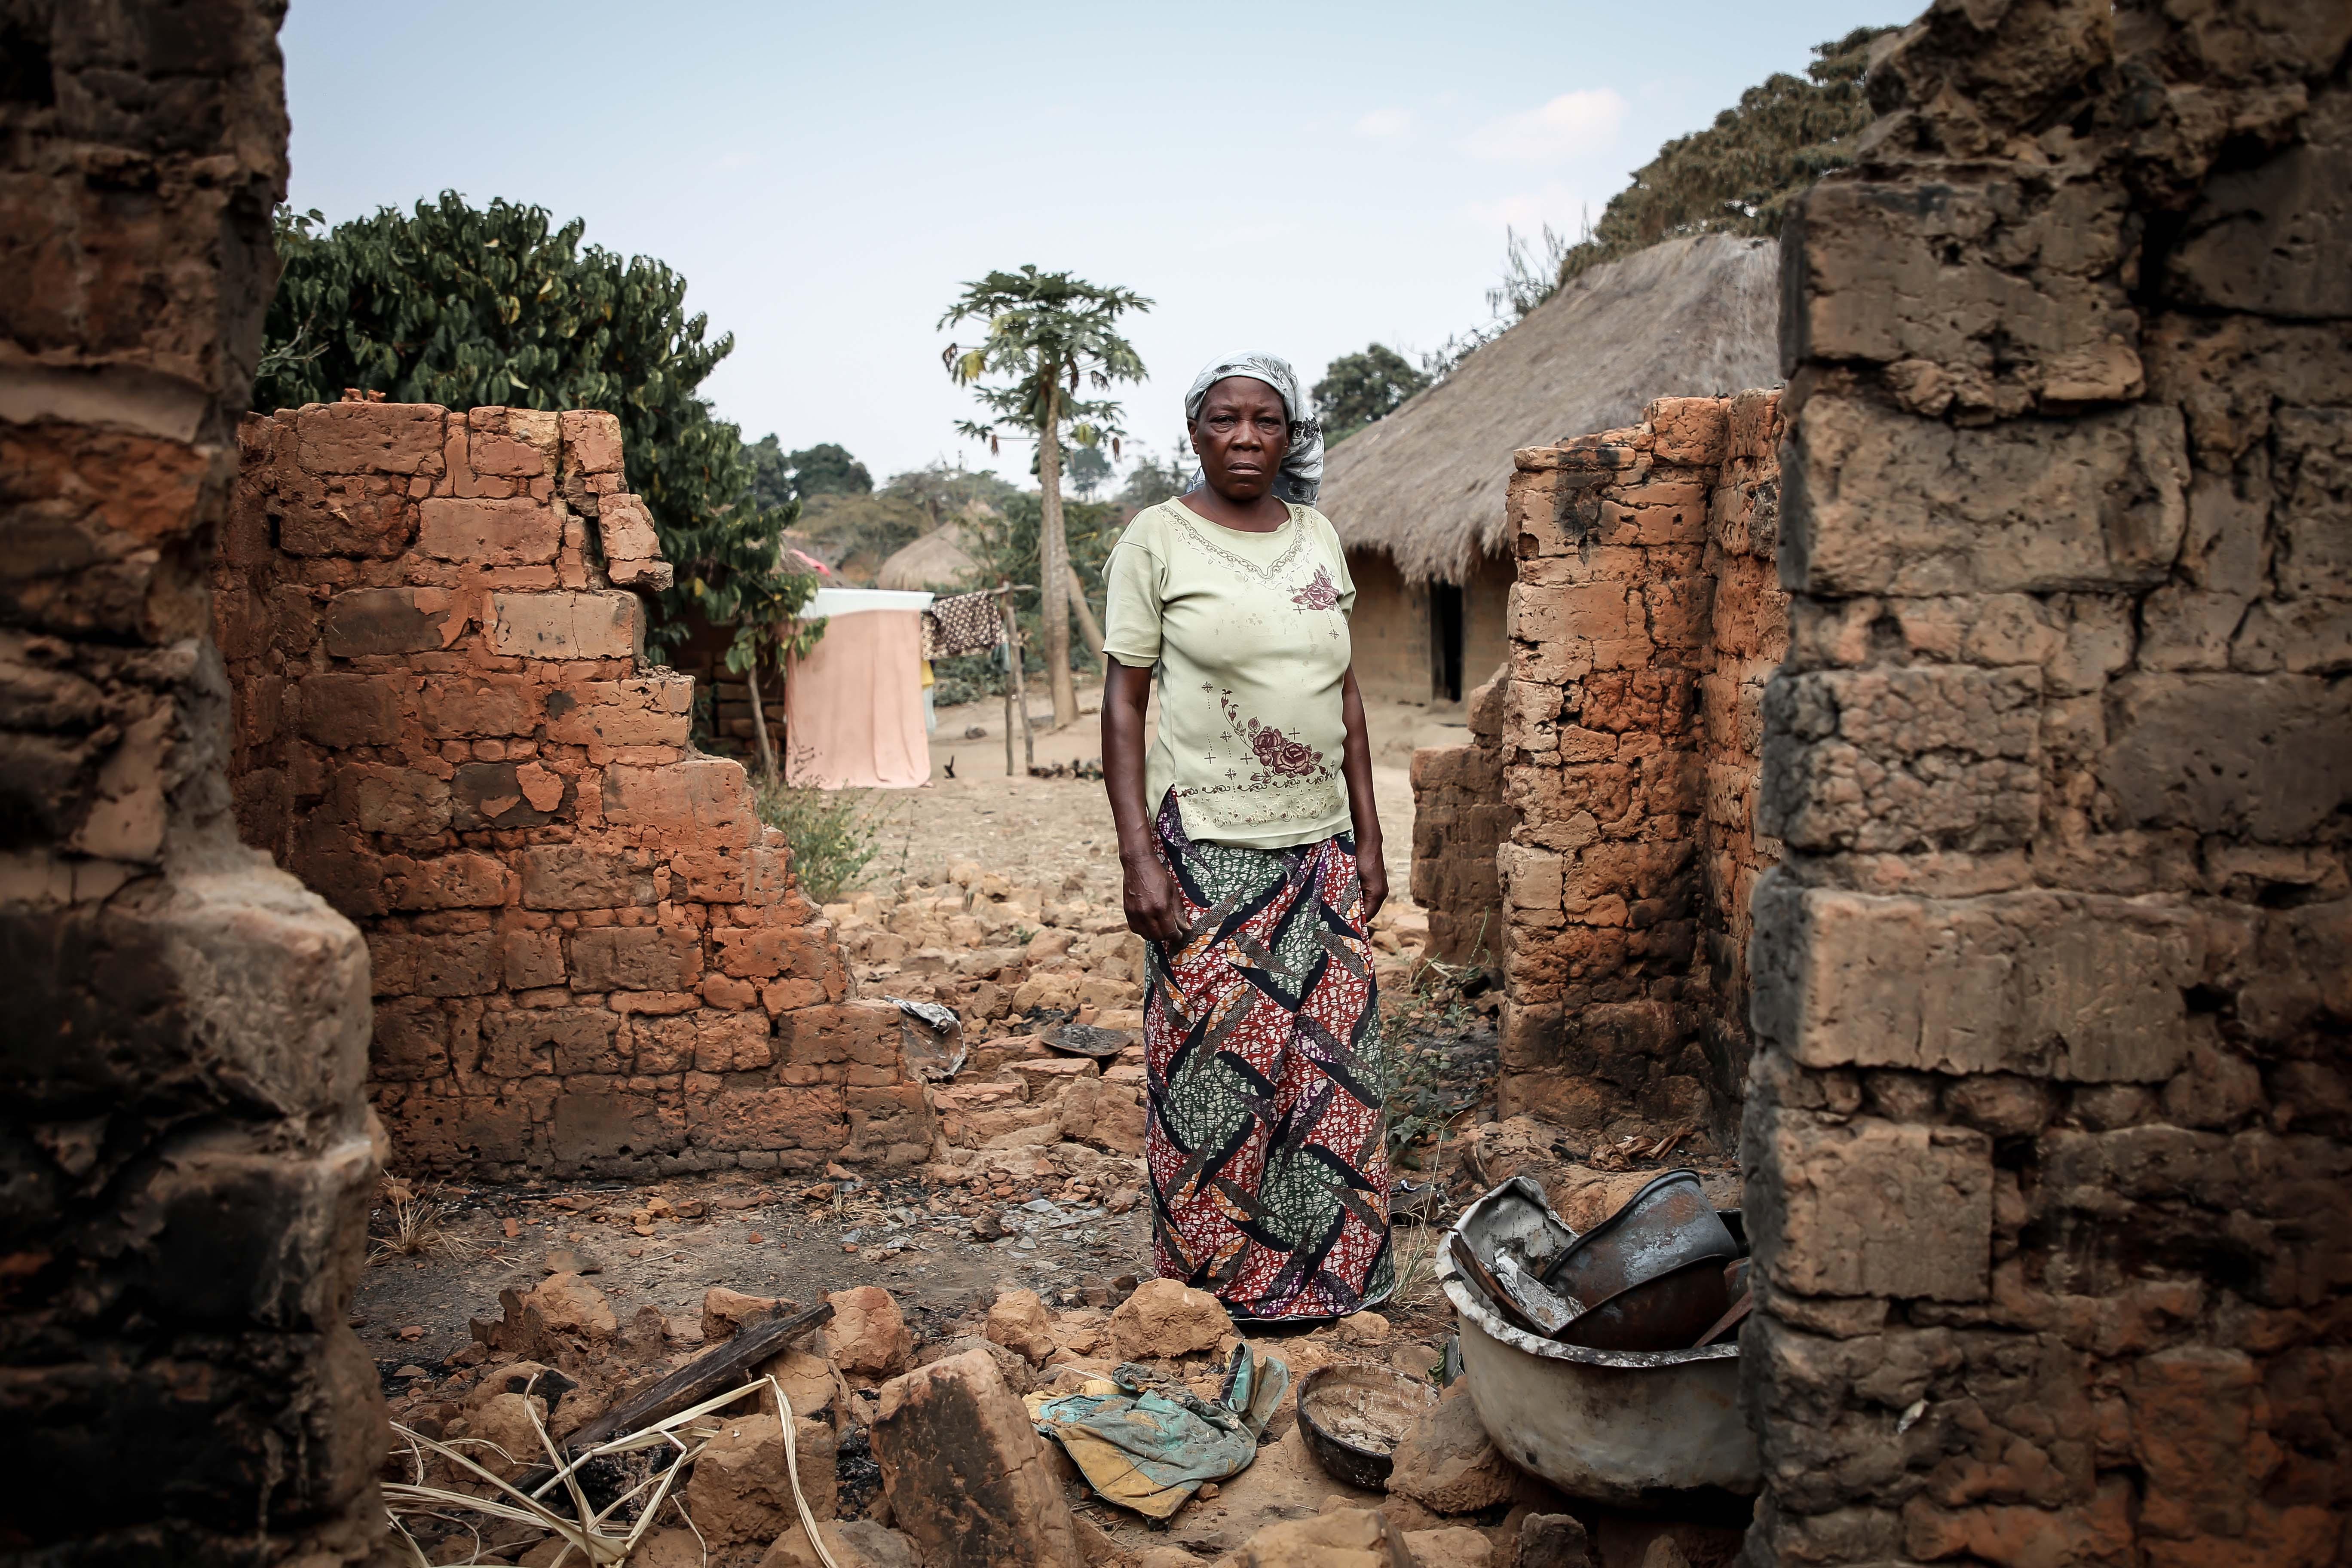 Patient S., who returned to her village of Katumbutele to find her house burnt down. 